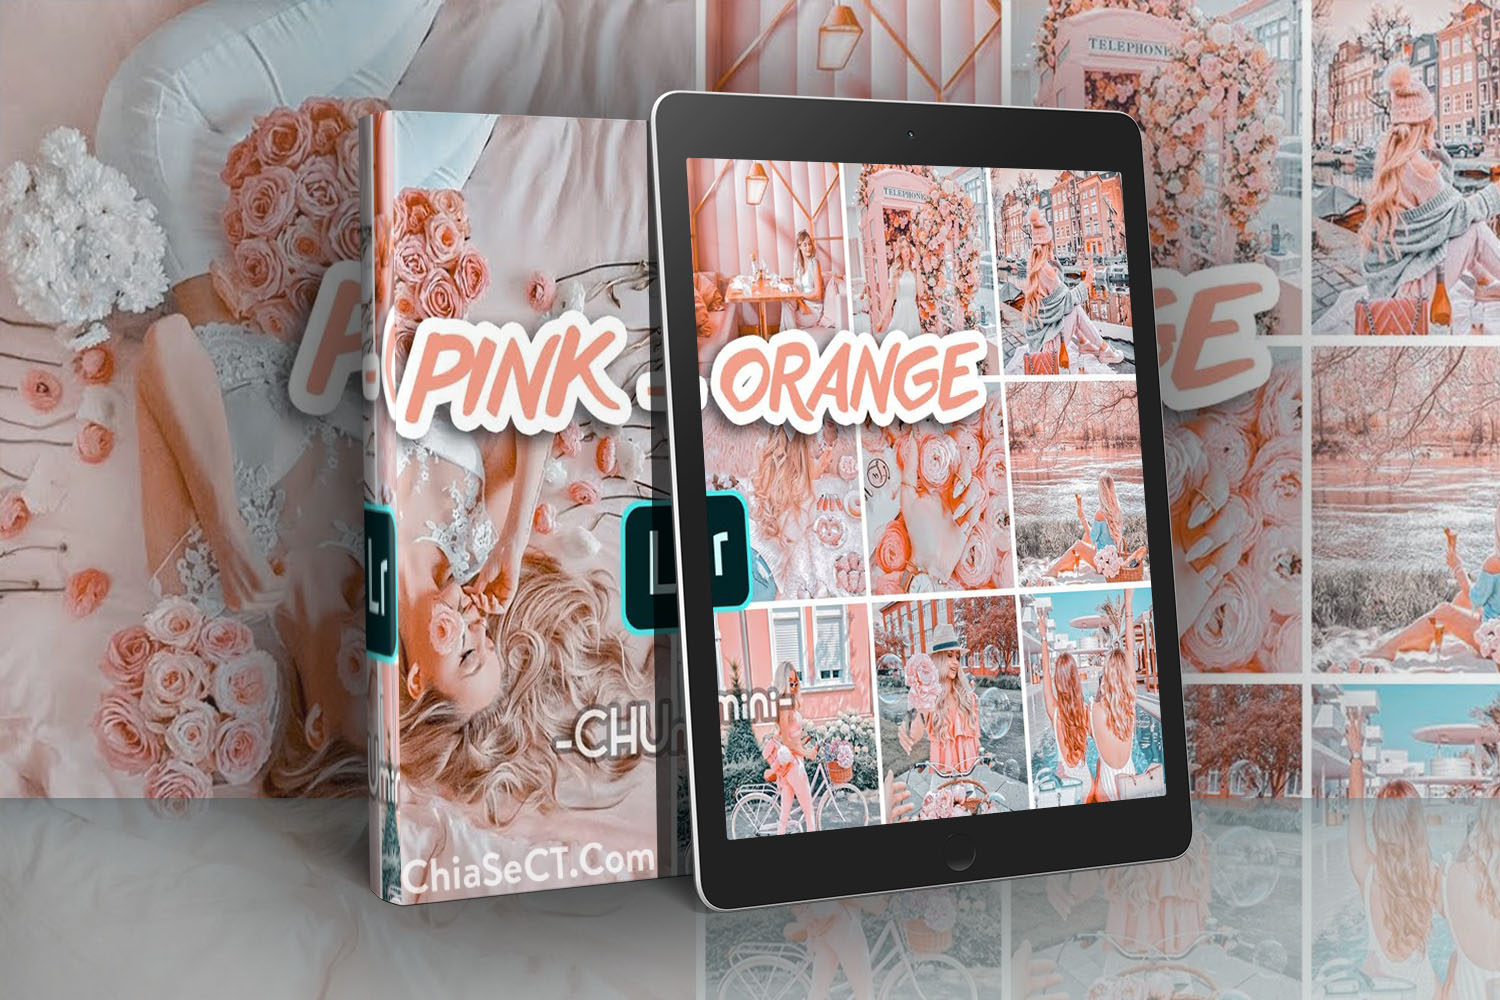 Share Presets PINK ORANGE Ligtroom by CHUmini